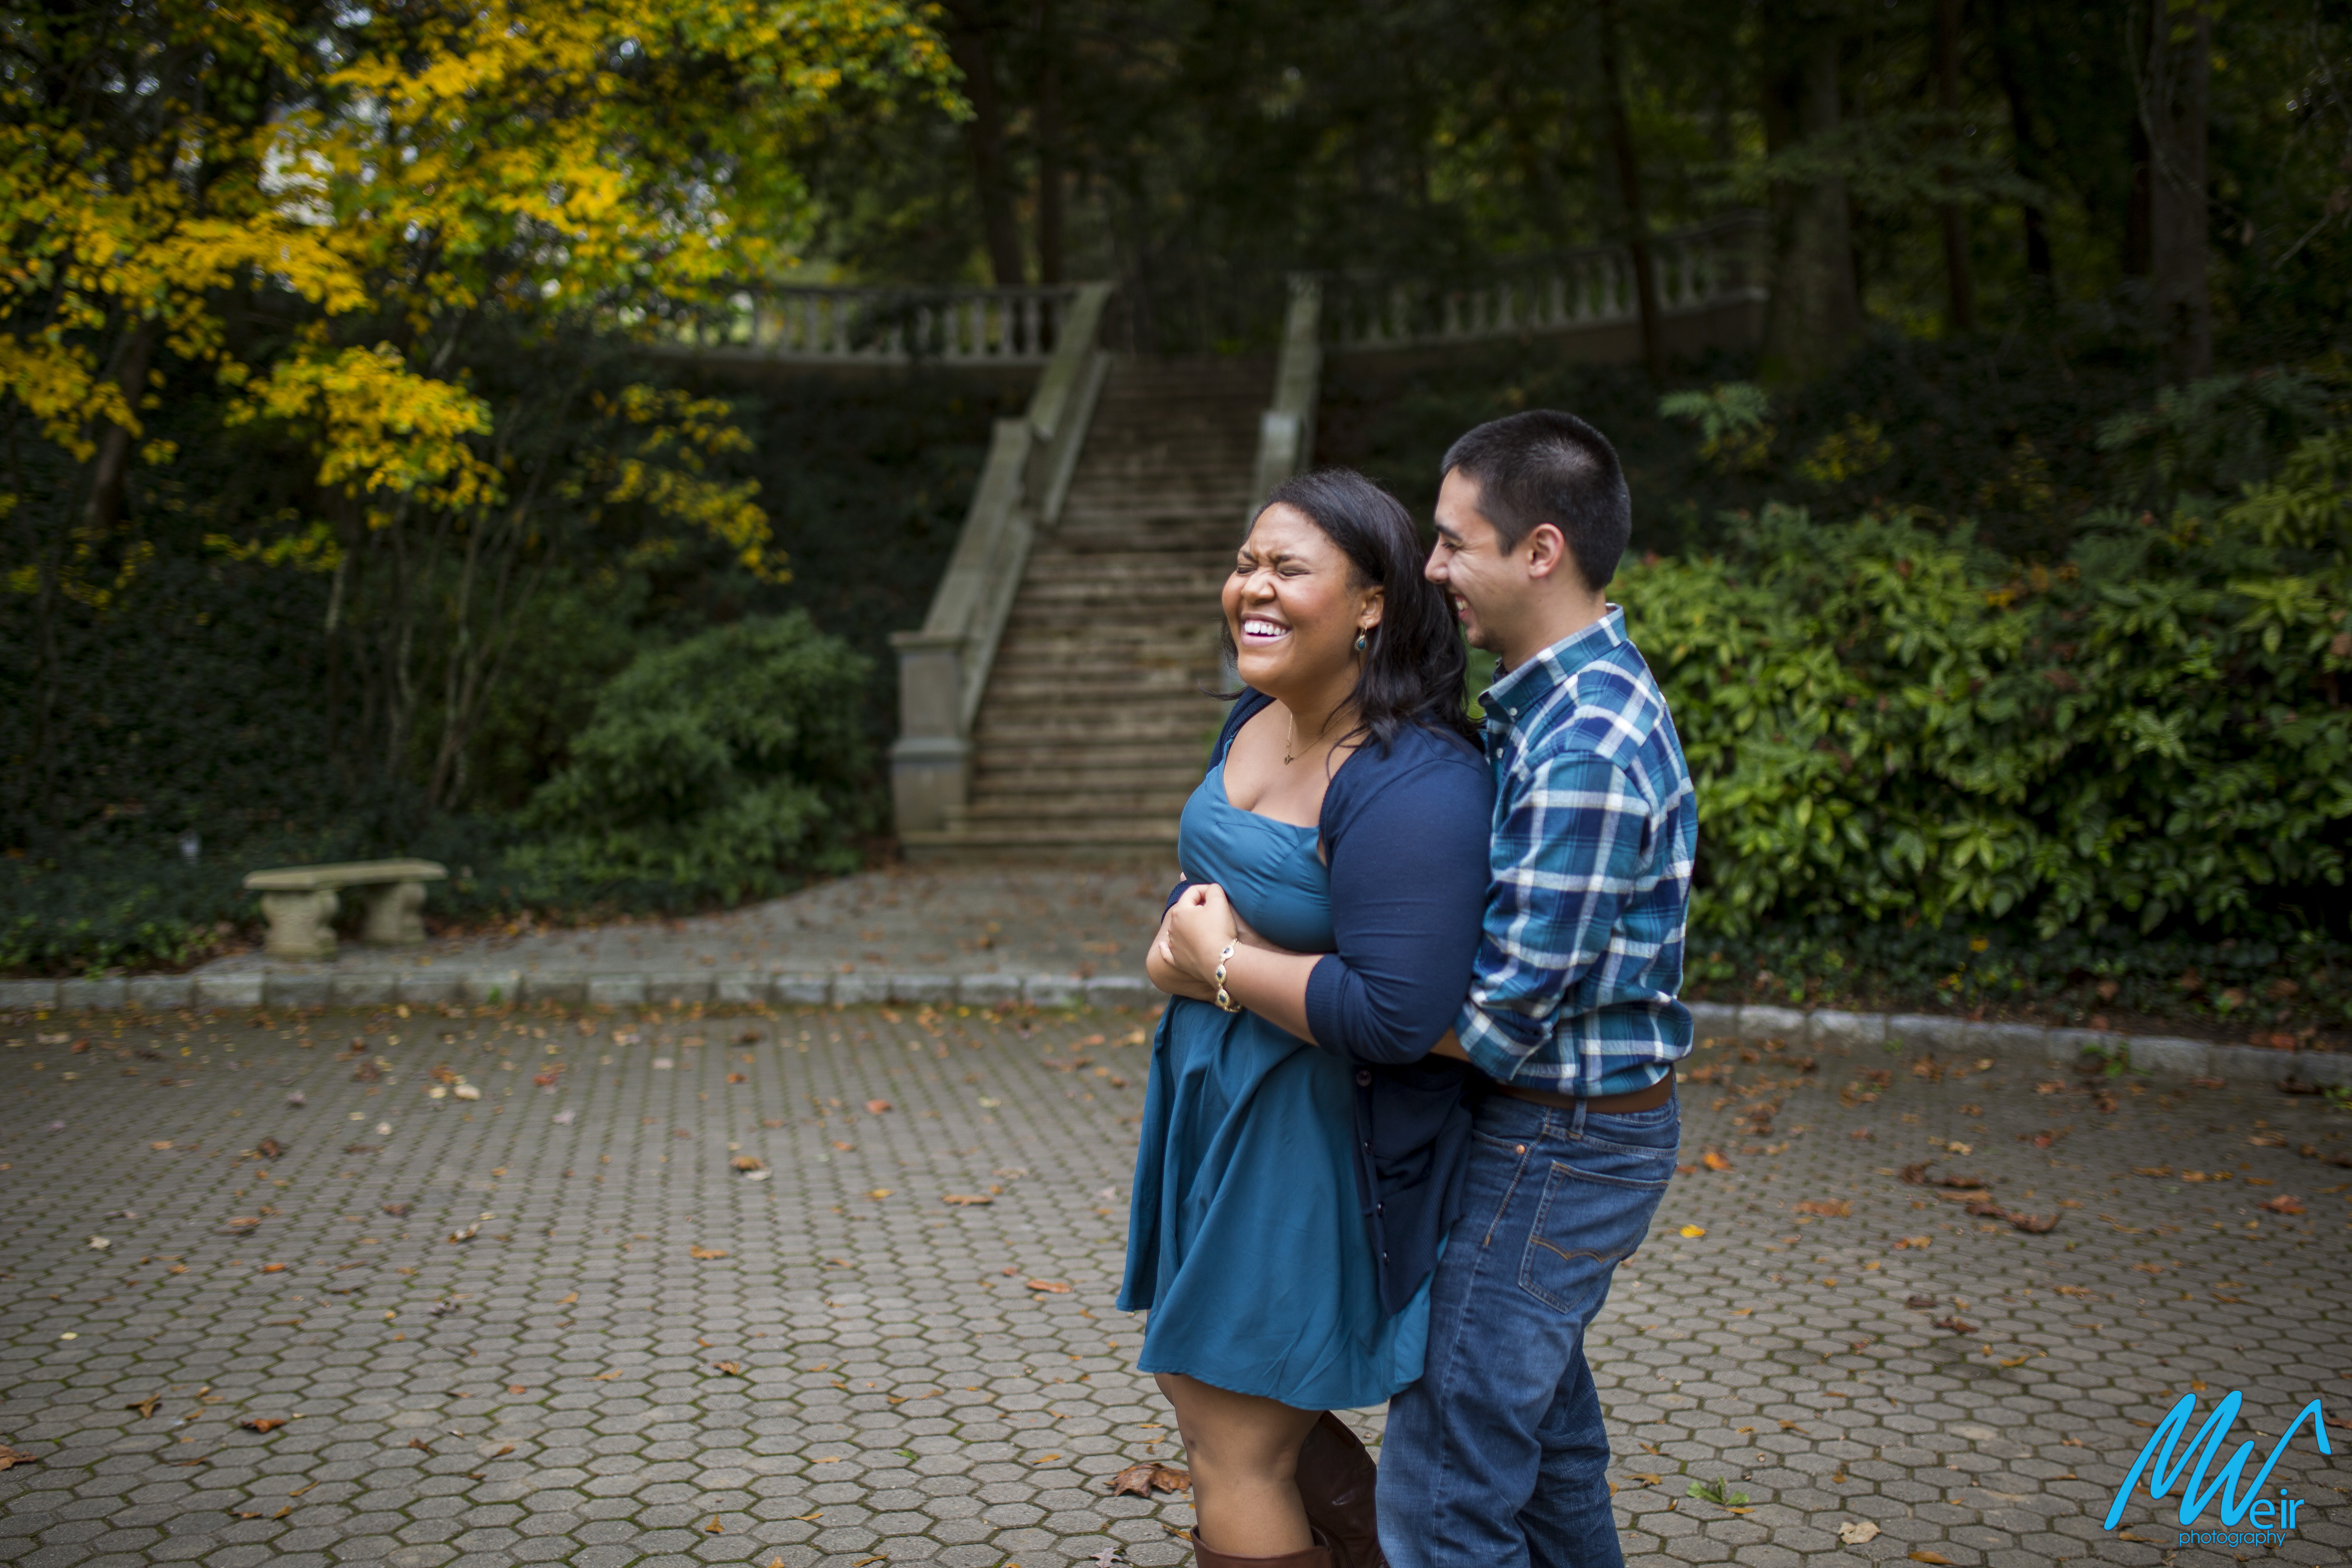 couple laugh together in cobblestone courtyard in front of grand stone staircase